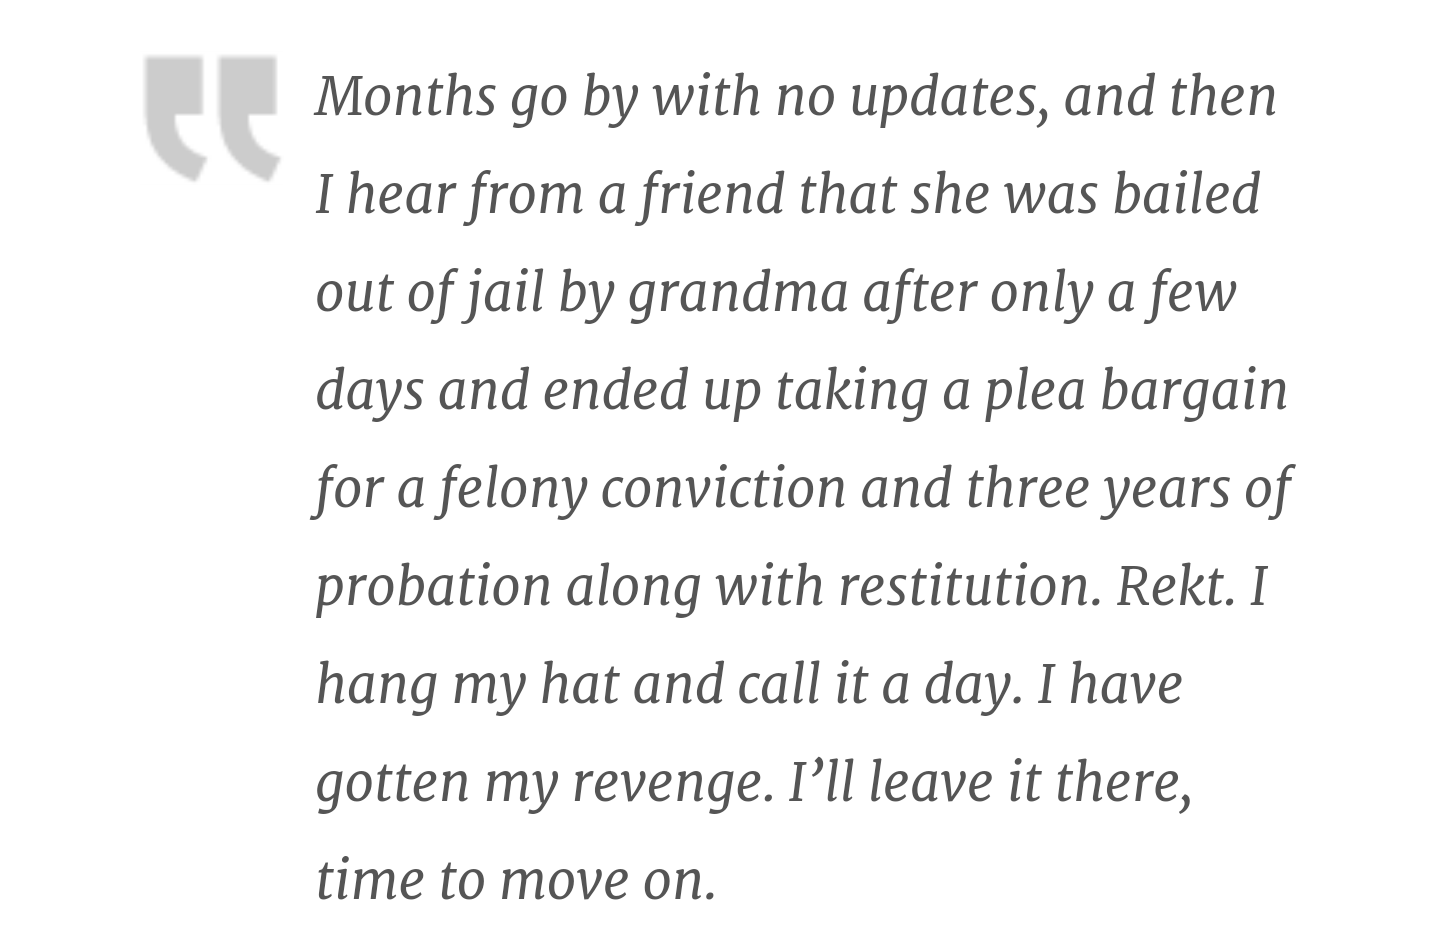 Months go by with no updates, and then I hear from a friend that she was bailed out of jail by grandma after only a few days and ended up taking a plea bargain for a felony conviction and three years of probation along with restitution. Rekt. I hang my ha